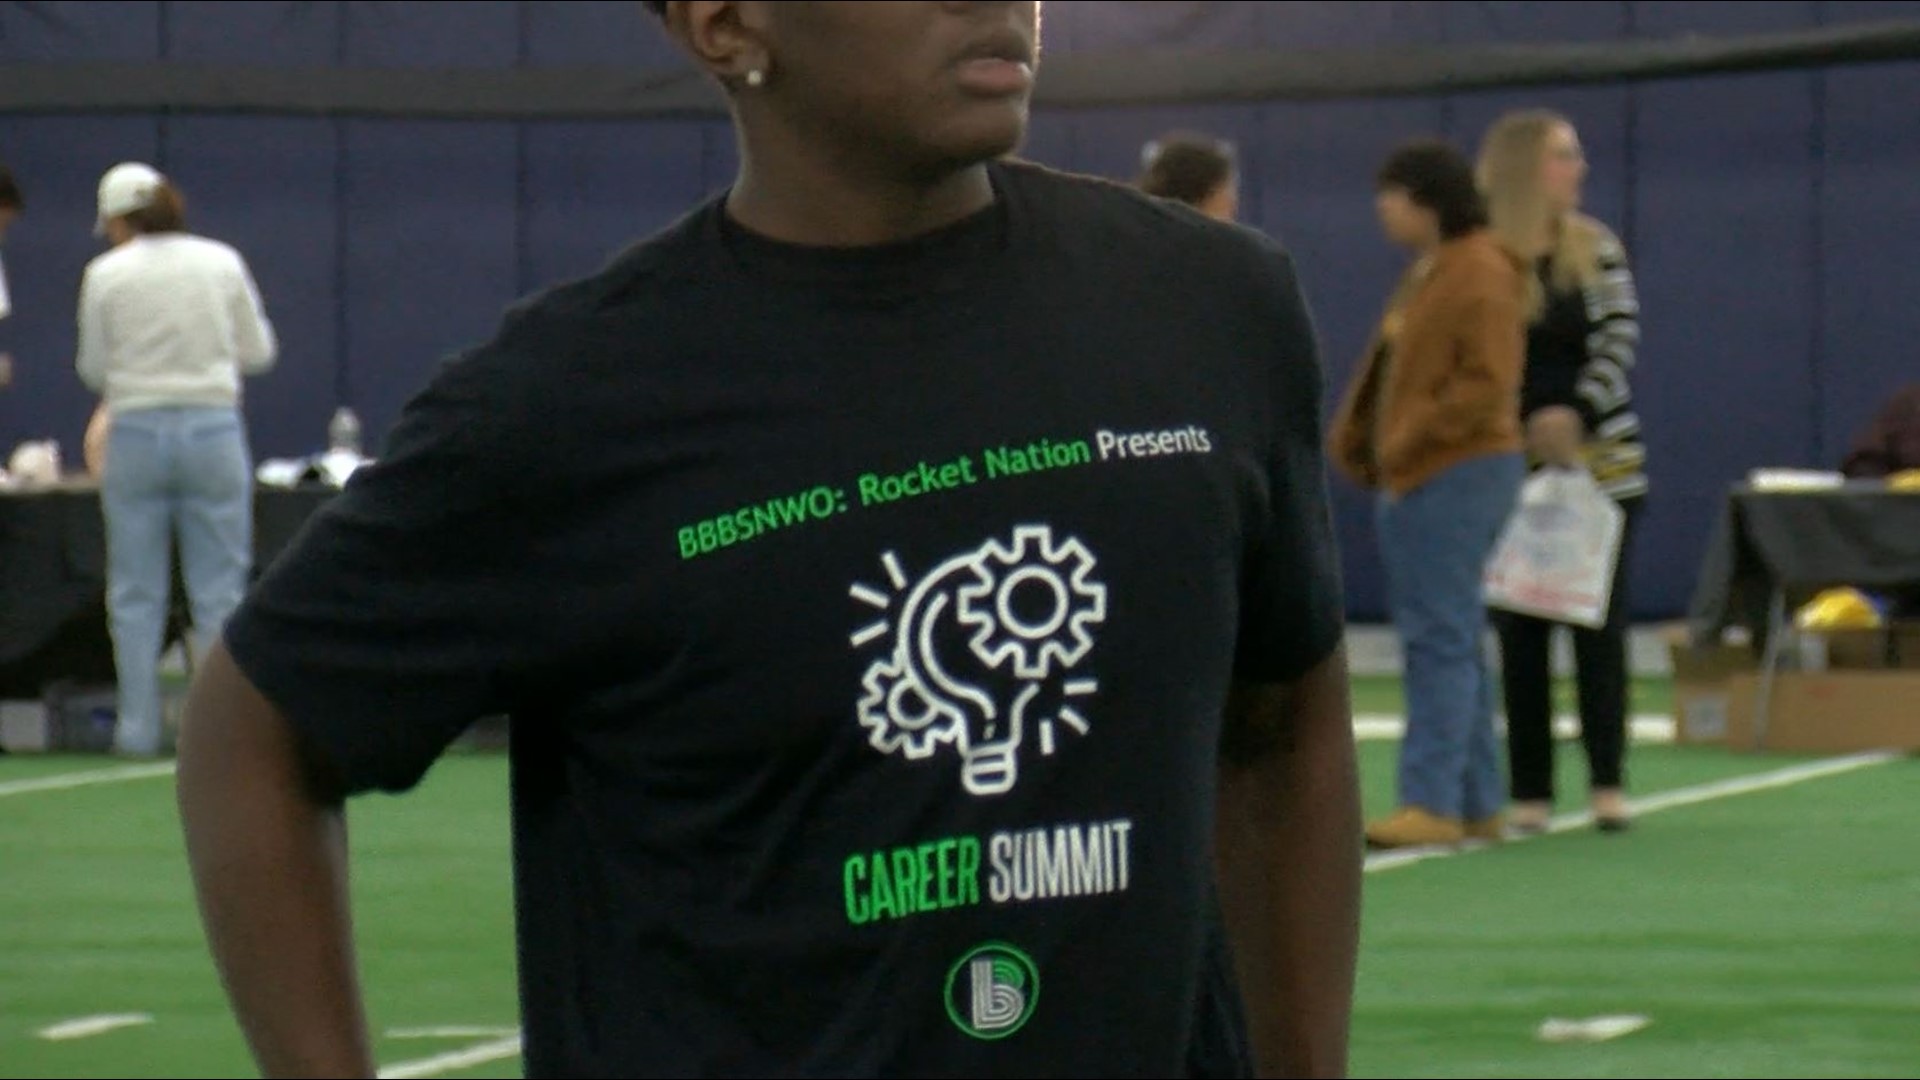 The career summit, billed as 'Empowering Future Leaders' was hosted by the nonprofit Big Brothers Big Sisters of Northwestern Ohio and Rocket Nation.